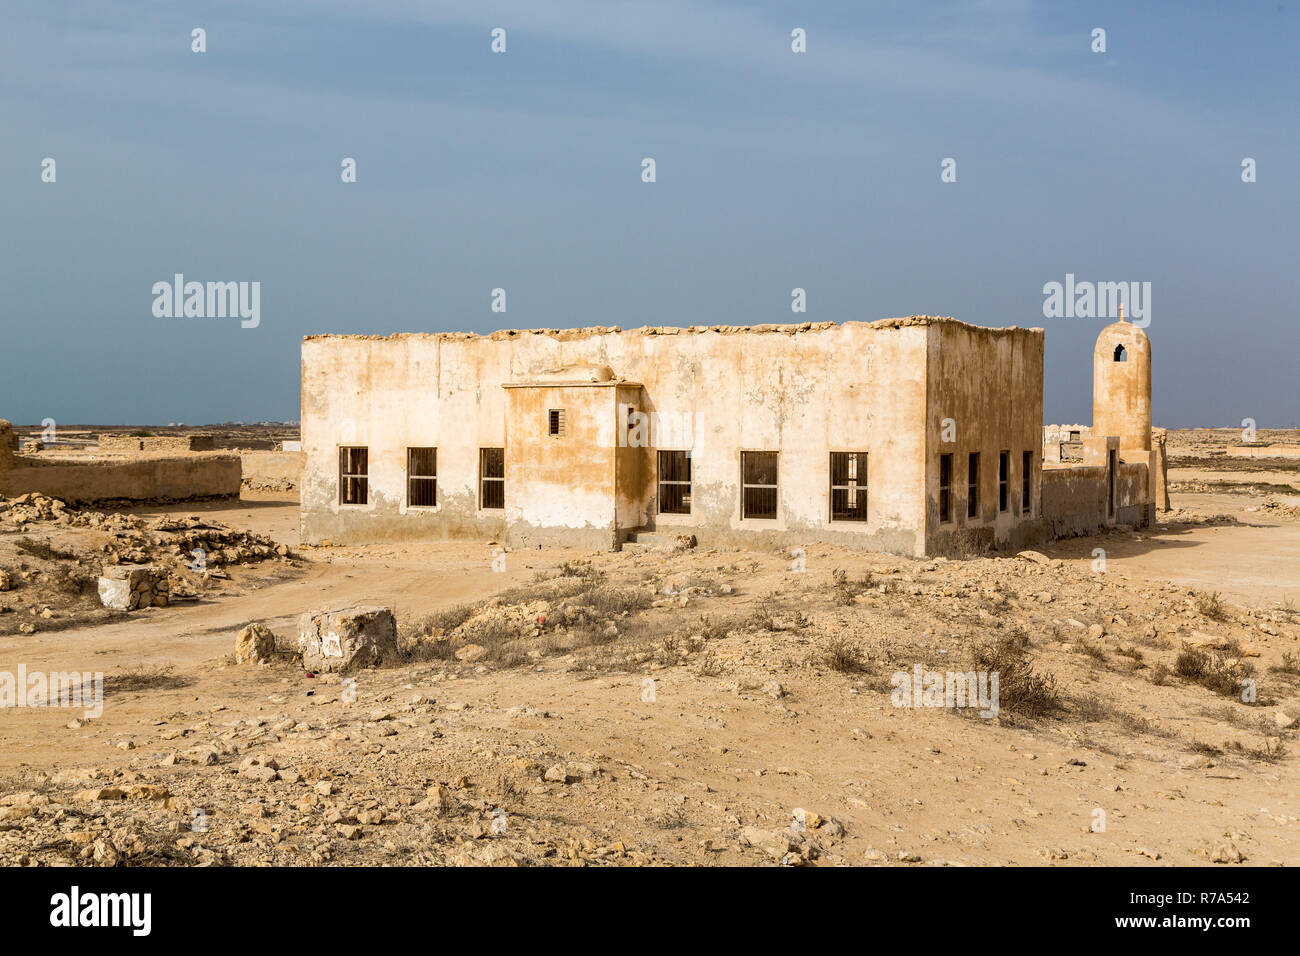 Ruined ancient old Arab pearling and fishing town Al Jumail, Qatar. The desert at coast of Persian Gulf. Minaret. Deserted village. Pile of stones Stock Photo